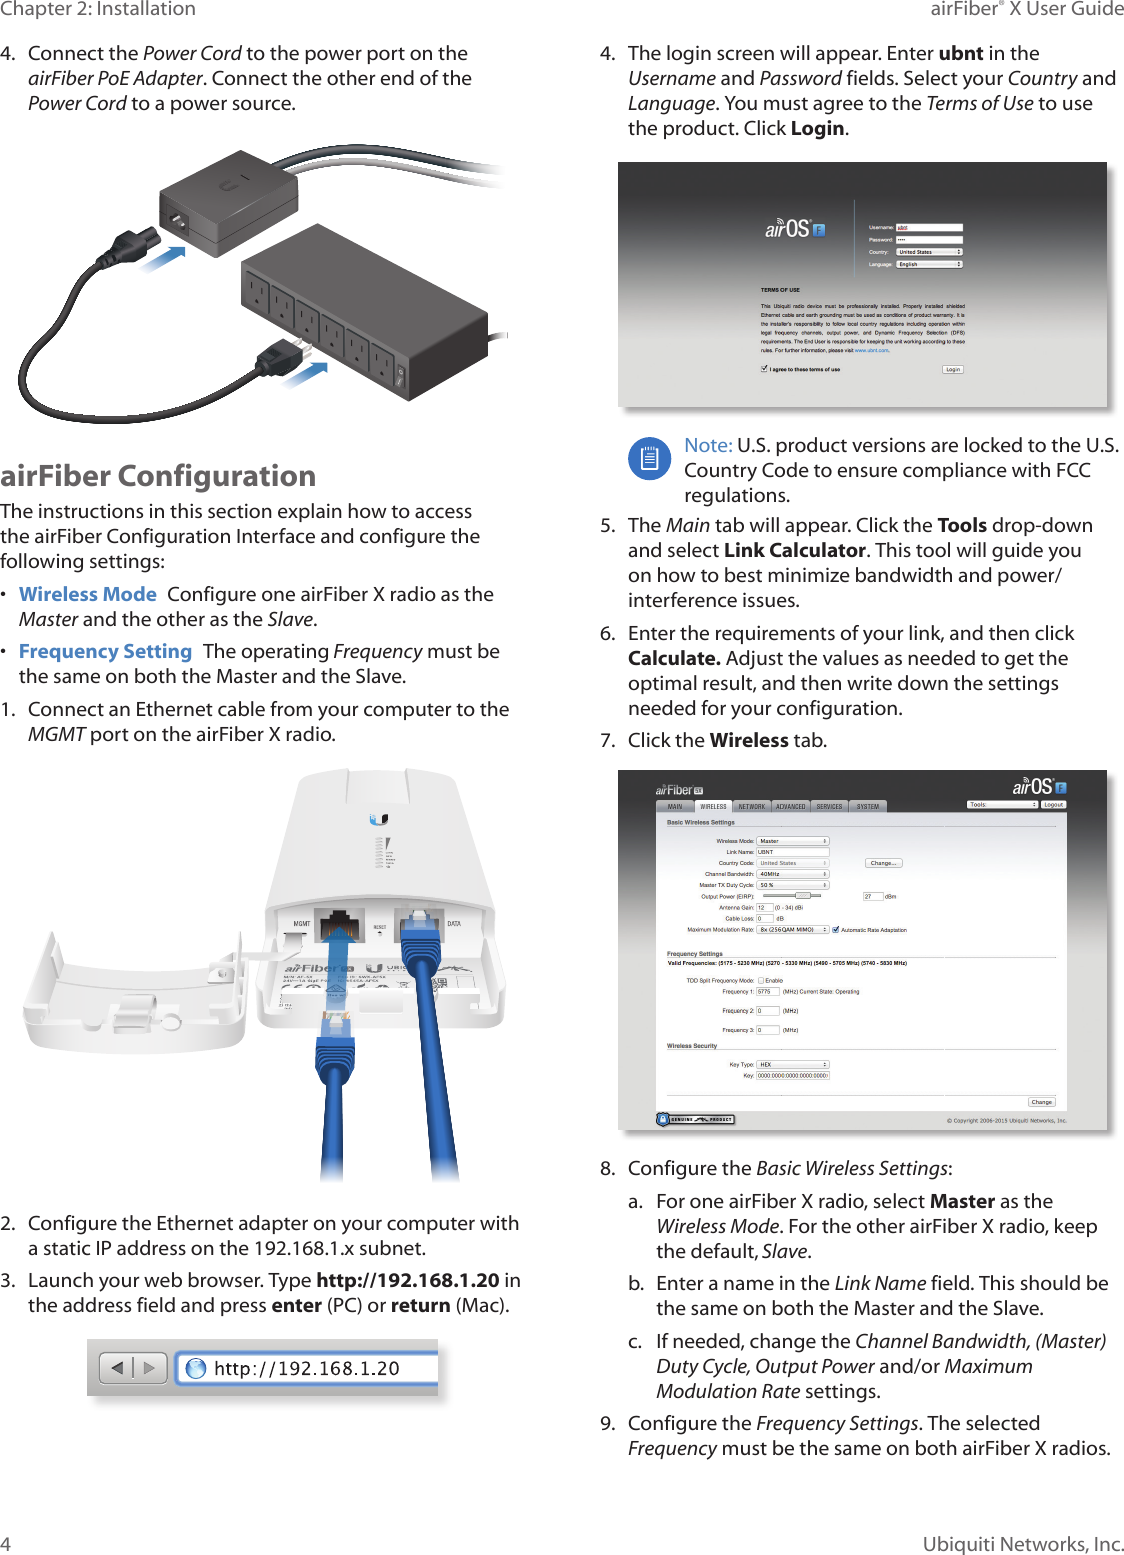 4Chapter 2: Installation airFiber® X User GuideUbiquiti Networks, Inc.4.  Connect the Power Cord to the power port on the airFiber PoE Adapter. Connect the other end of the Power Cord to a powersource.airFiber ConfigurationThe instructions in this section explain how to access the airFiber Configuration Interface and configure the following settings: •  Wireless Mode  Configure one airFiberX radio as the Master and the other as the Slave.•  Frequency Setting  The operating Frequency must be the same on both the Master and the Slave.1.  Connect an Ethernet cable from your computer to the MGMT port on the airFiberX radio.2.  Configure the Ethernet adapter on your computer with a static IP address on the 192.168.1.x subnet.3.  Launch your web browser. Type http://192.168.1.20 in the address field and press enter (PC) or return (Mac). 4.  The login screen will appear. Enter ubnt in the Username and Password fields. Select your Country and Language. You must agree to the Terms of Use to use the product. Click Login.Note: U.S. product versions are locked to the U.S. Country Code to ensure compliance with FCC regulations. 5.  The Main tab will appear. Click the Tools drop-down and select Link Calculator. This tool will guide you on how to best minimize bandwidth and power/interference issues.6.  Enter the requirements of your link, and then click Calculate. Adjust the values as needed to get the optimal result, and then write down the settings needed for your configuration.7.  Click the Wireless tab.8.  Configure the Basic Wireless Settings:a.  For one airFiberX radio, select Master as the Wireless Mode. For the other airFiberX radio, keep the default,Slave.b.  Enter a name in the Link Name field. This should be the same on both the Master and the Slave.c.  If needed, change the Channel Bandwidth, (Master) Duty Cycle, Output Power and/or Maximum Modulation Rate settings.9.  Configure the Frequency Settings. The selected Frequency must be the same on both airFiberX radios.